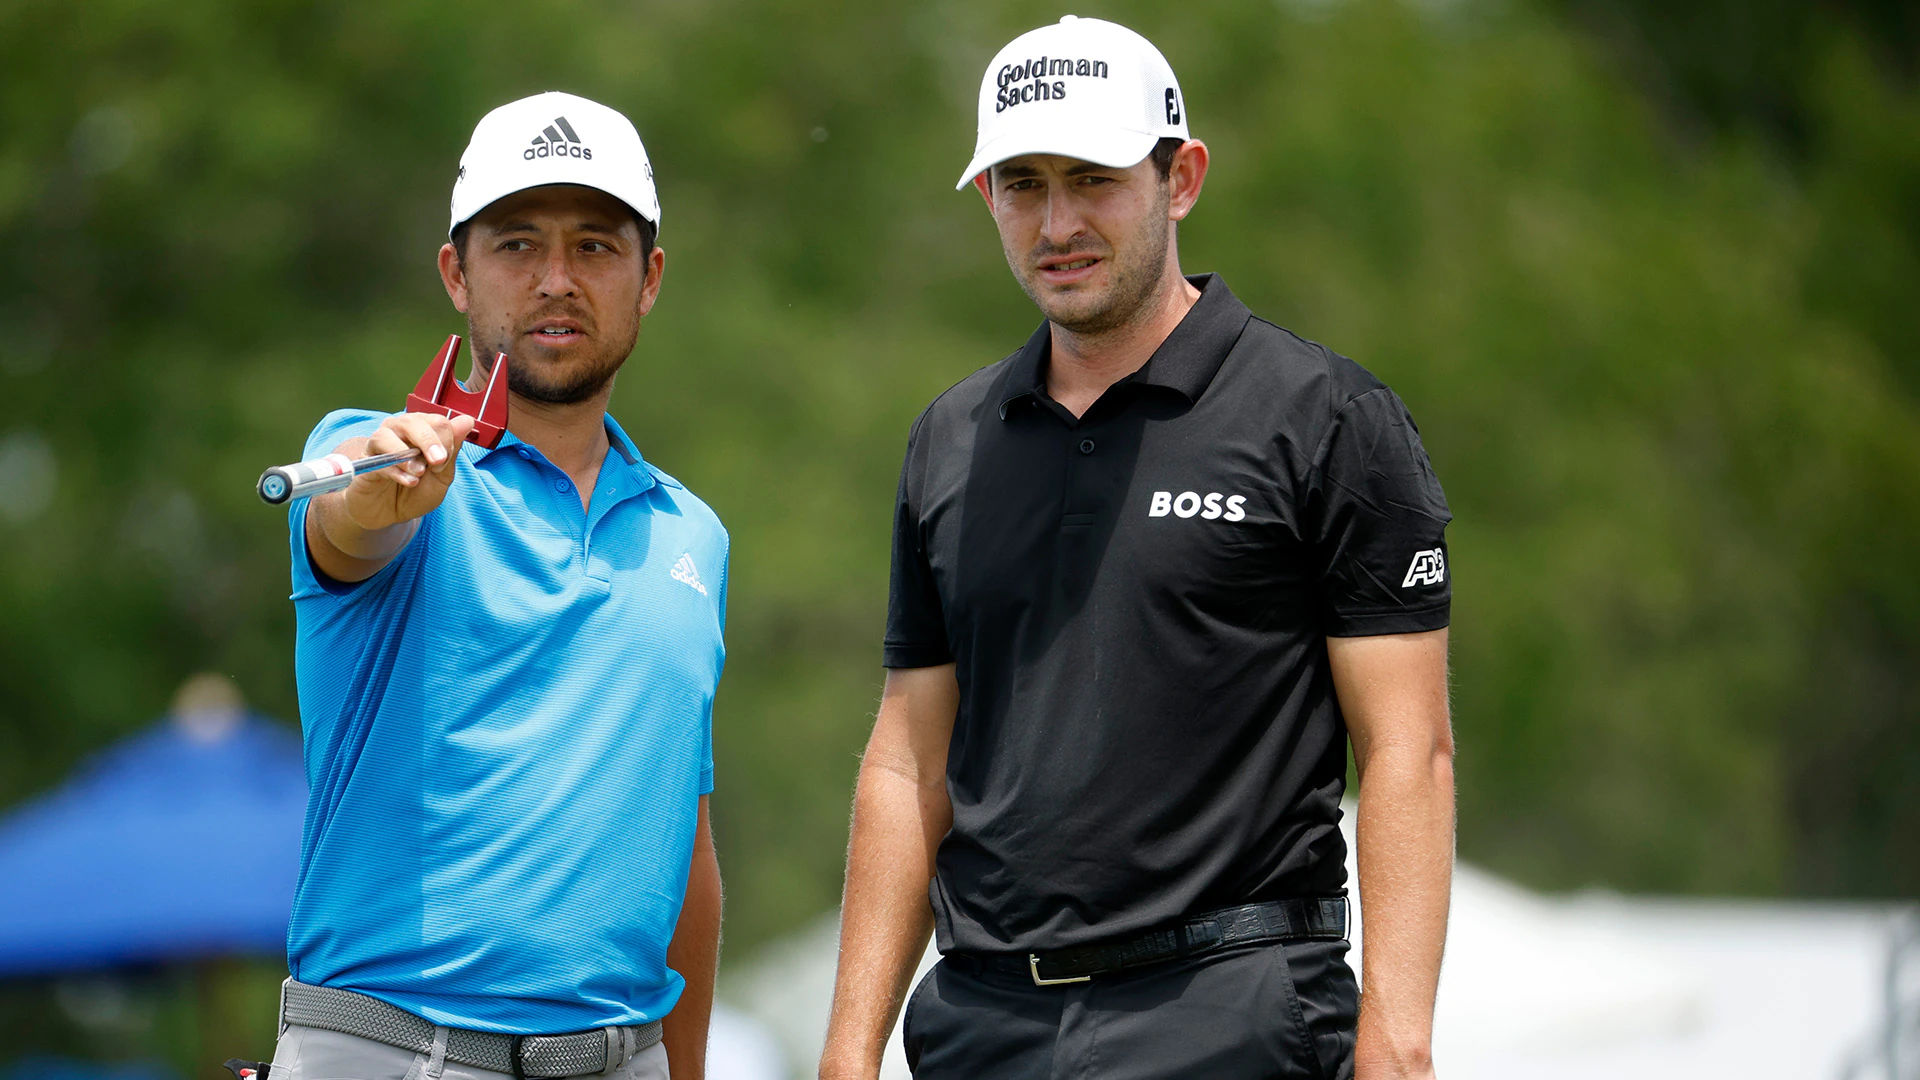 Patrick Cantlay and Xander Schauffele maintain lead in Round 2 of Zurich Classic